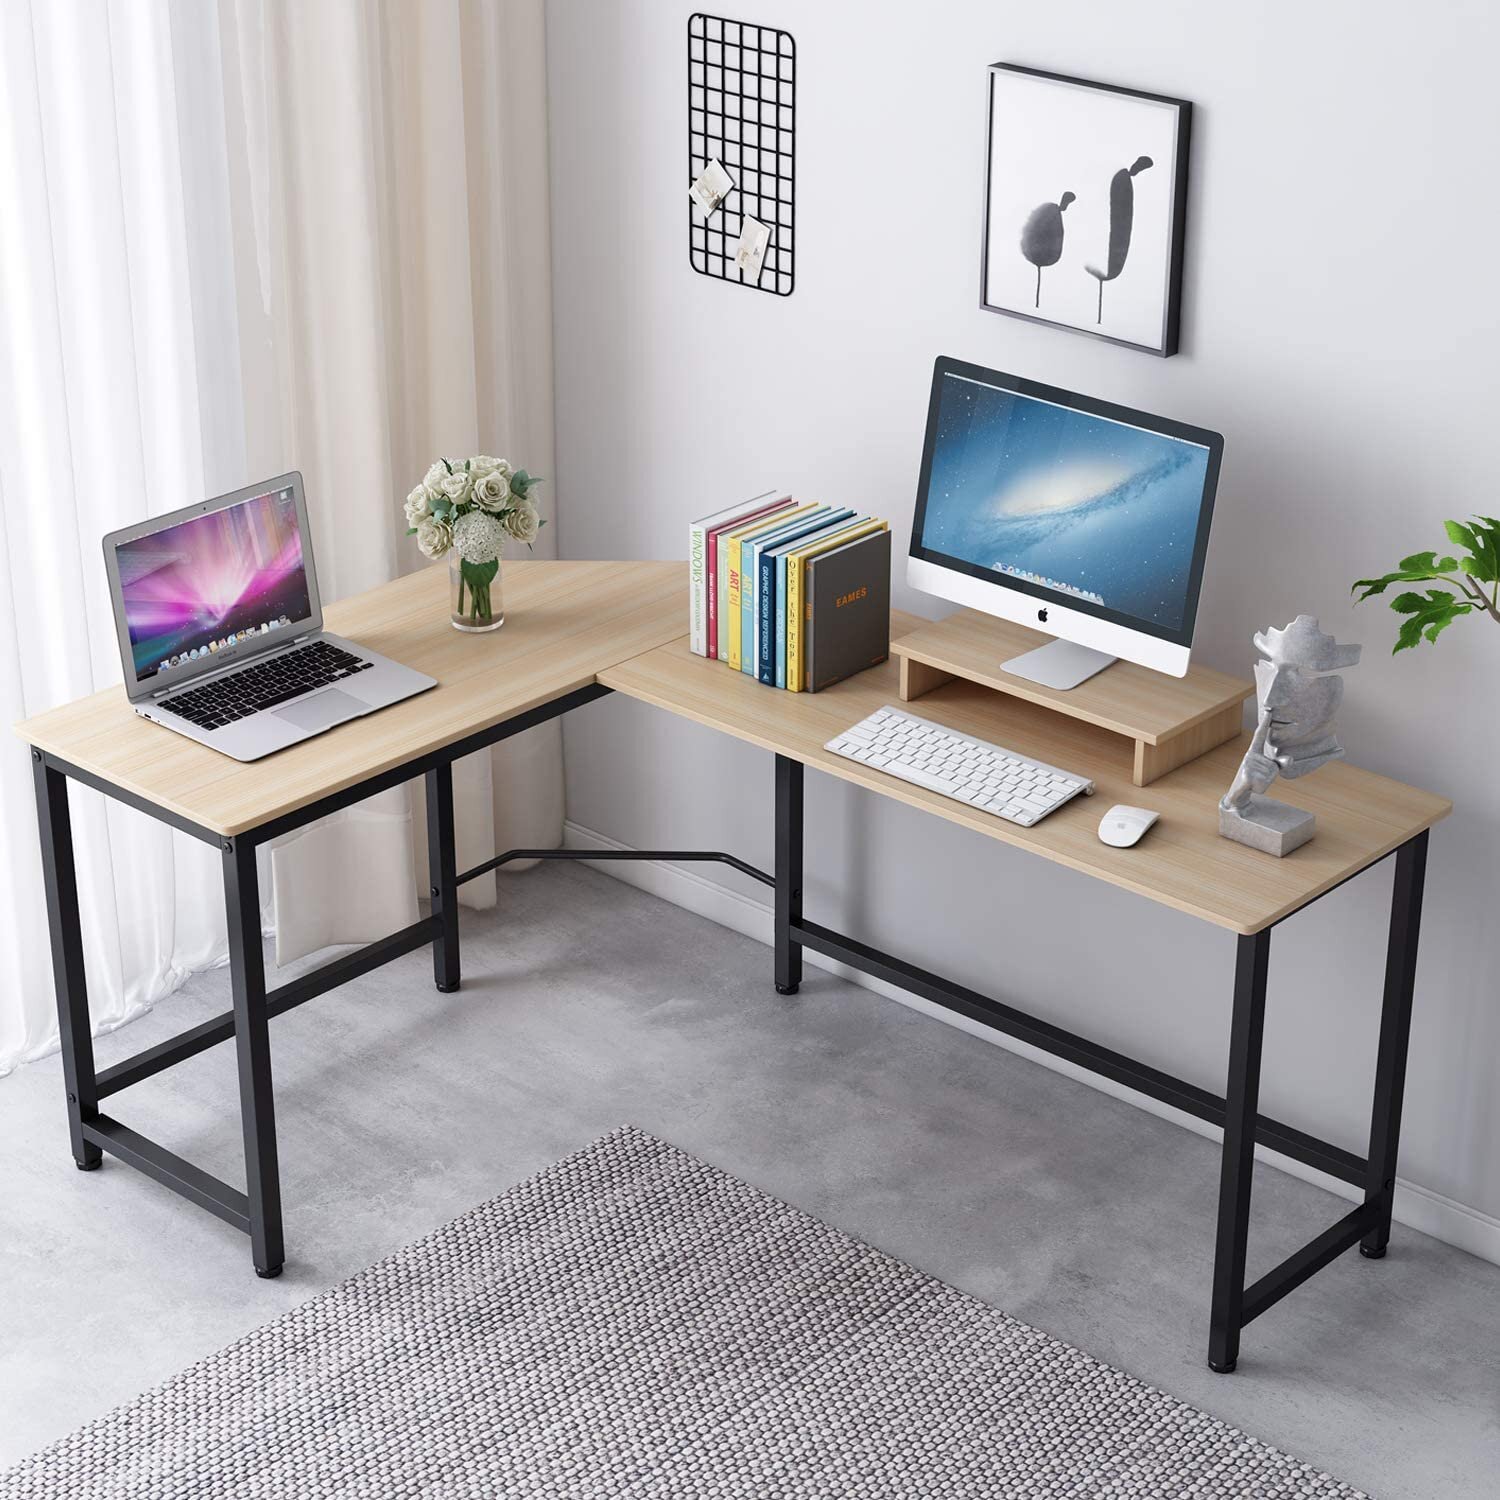 Details about   L Shaped Computer Desk w/ Monitor Stand & USB Ports 44x19 39x19 Sides Walnut H 